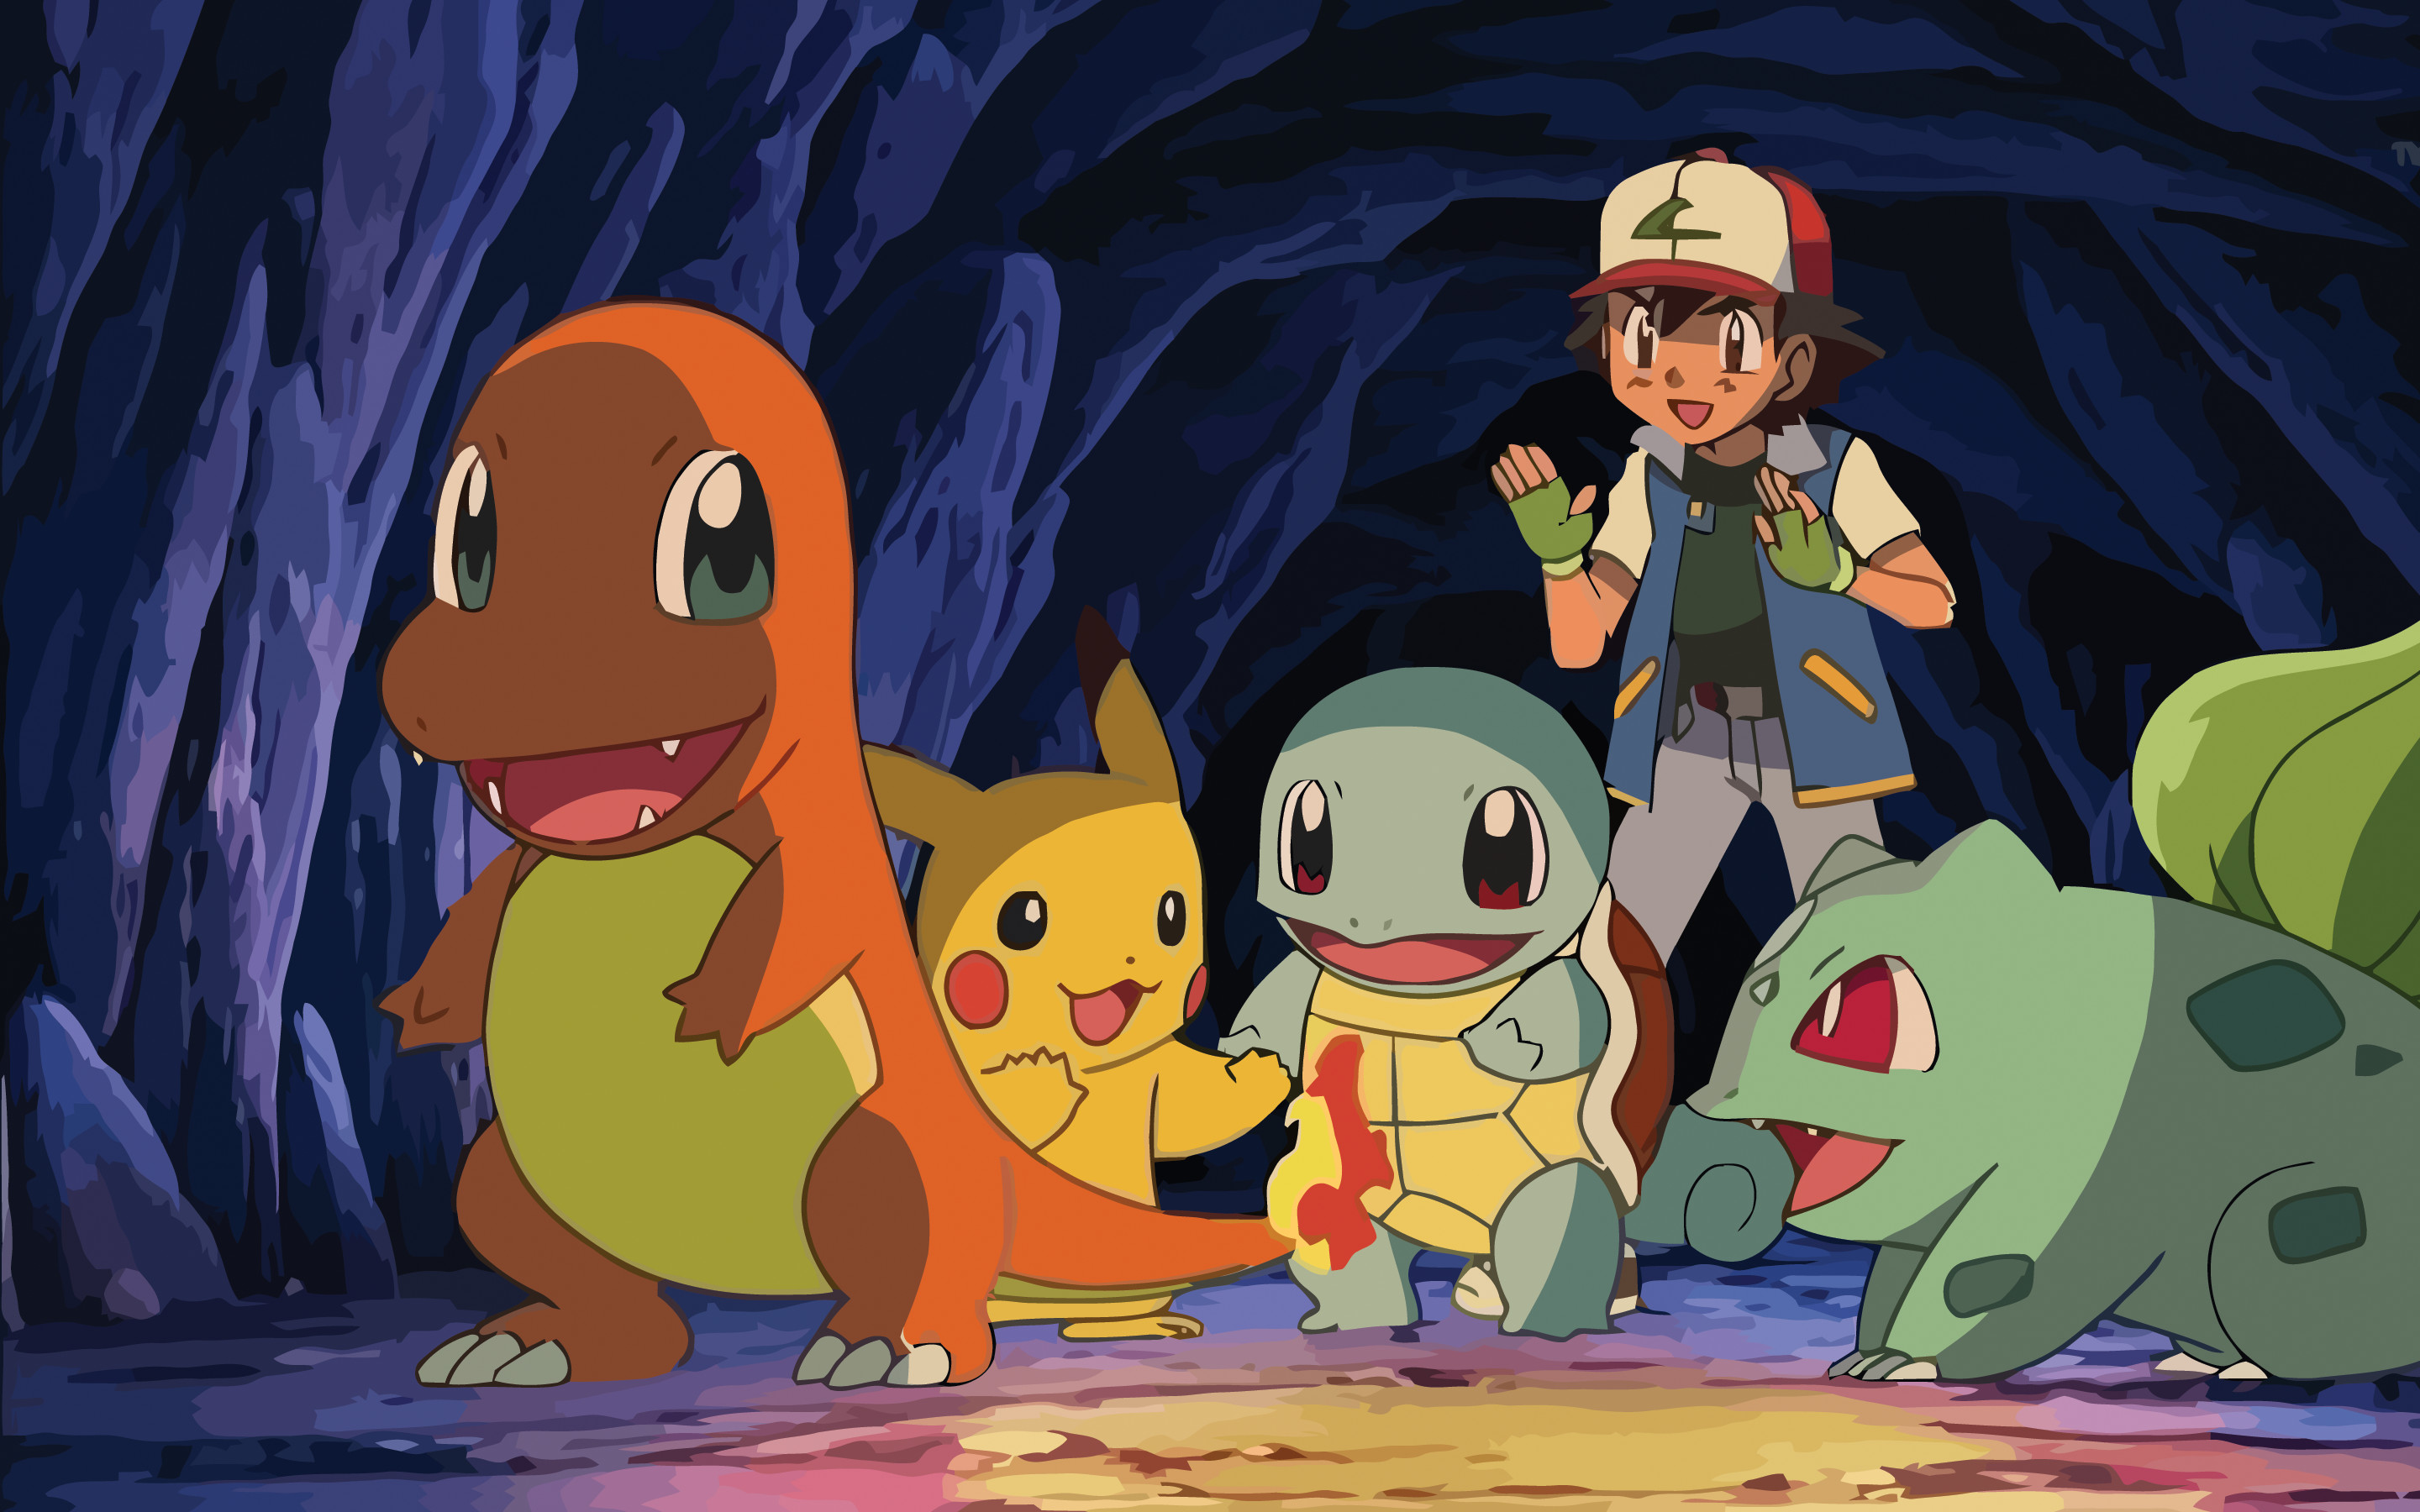 Pokemons Ash Ketchum becomes world champion after 25 years